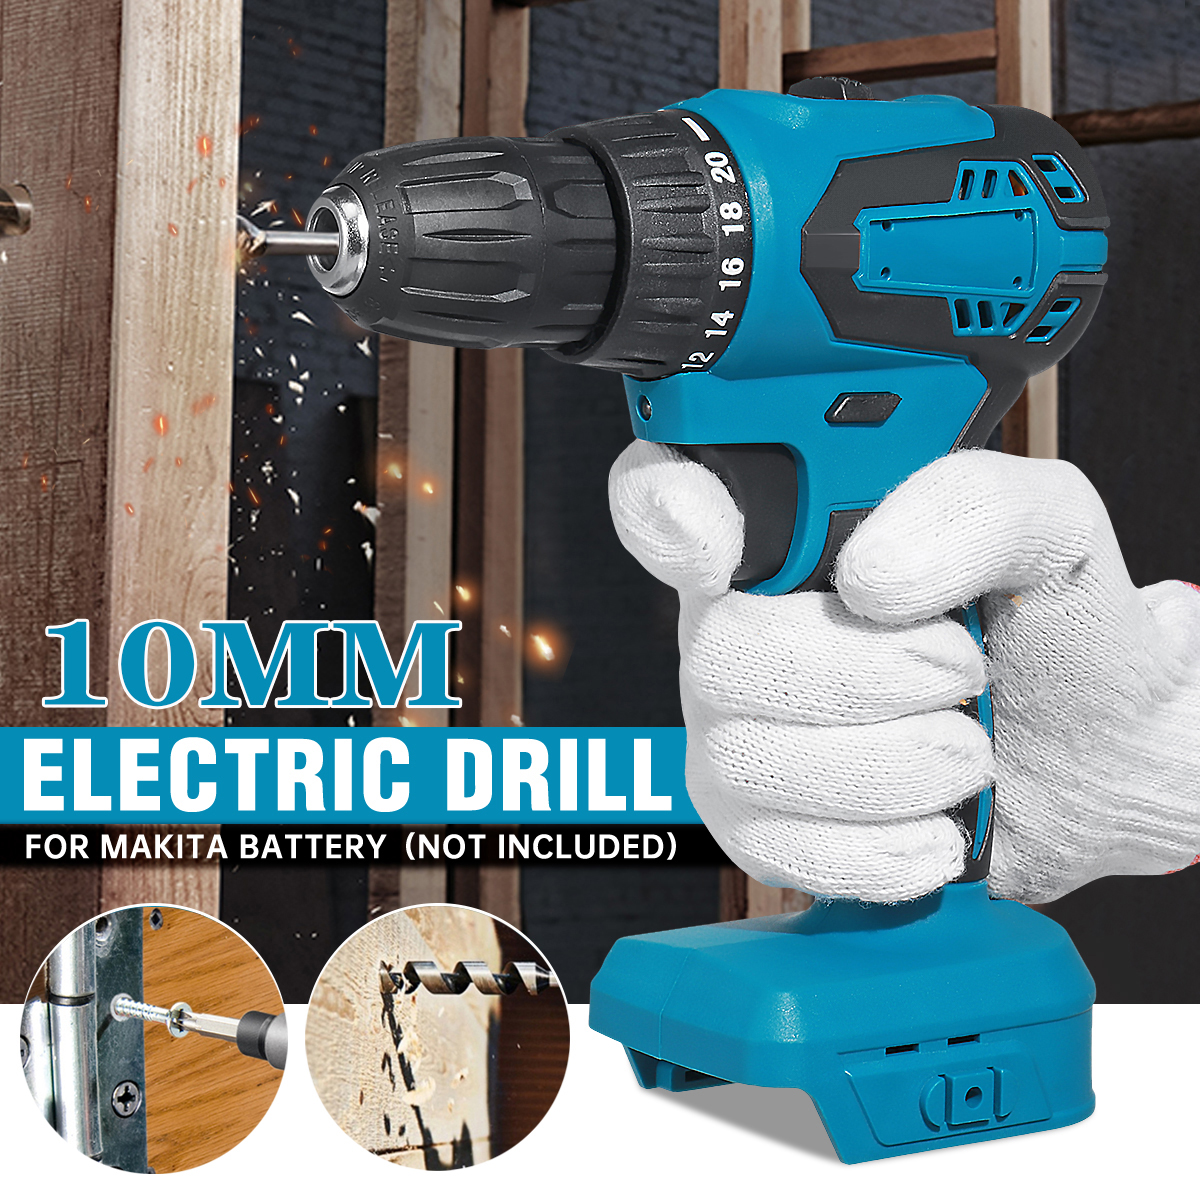 10mm-Rechargable-Electric-Drill-Screwdriver-1350RPM-2-Speed-Impact-Hand-Drill-Fit-Makita-Battery-1882944-1